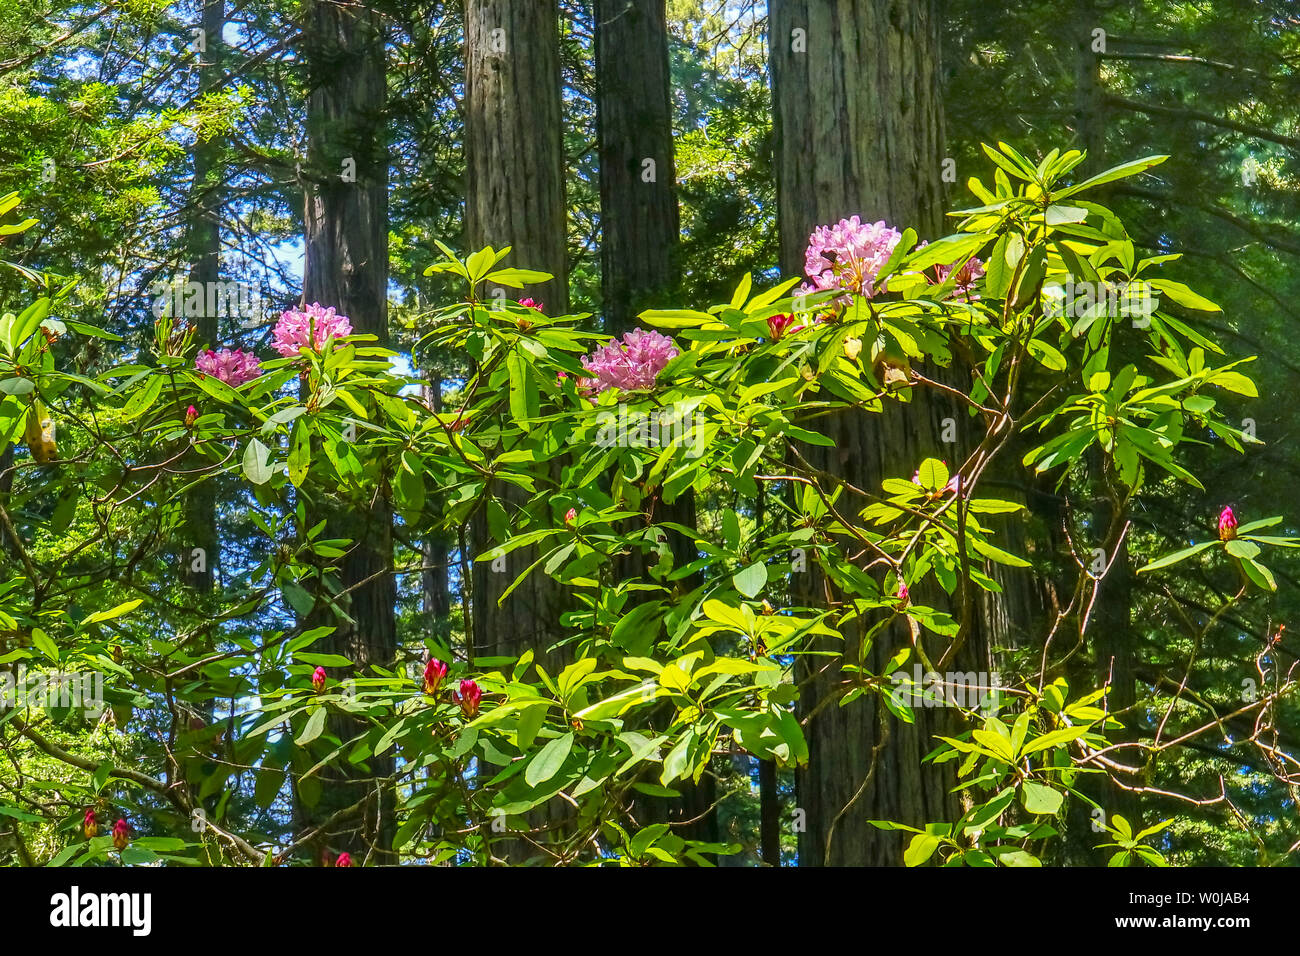 Green Trees Pink Rhododendron Lady Bird Johnson Grove Redwoods National Park California. Tallest trees in  World, 1000s of year old, size large buildi Stock Photo